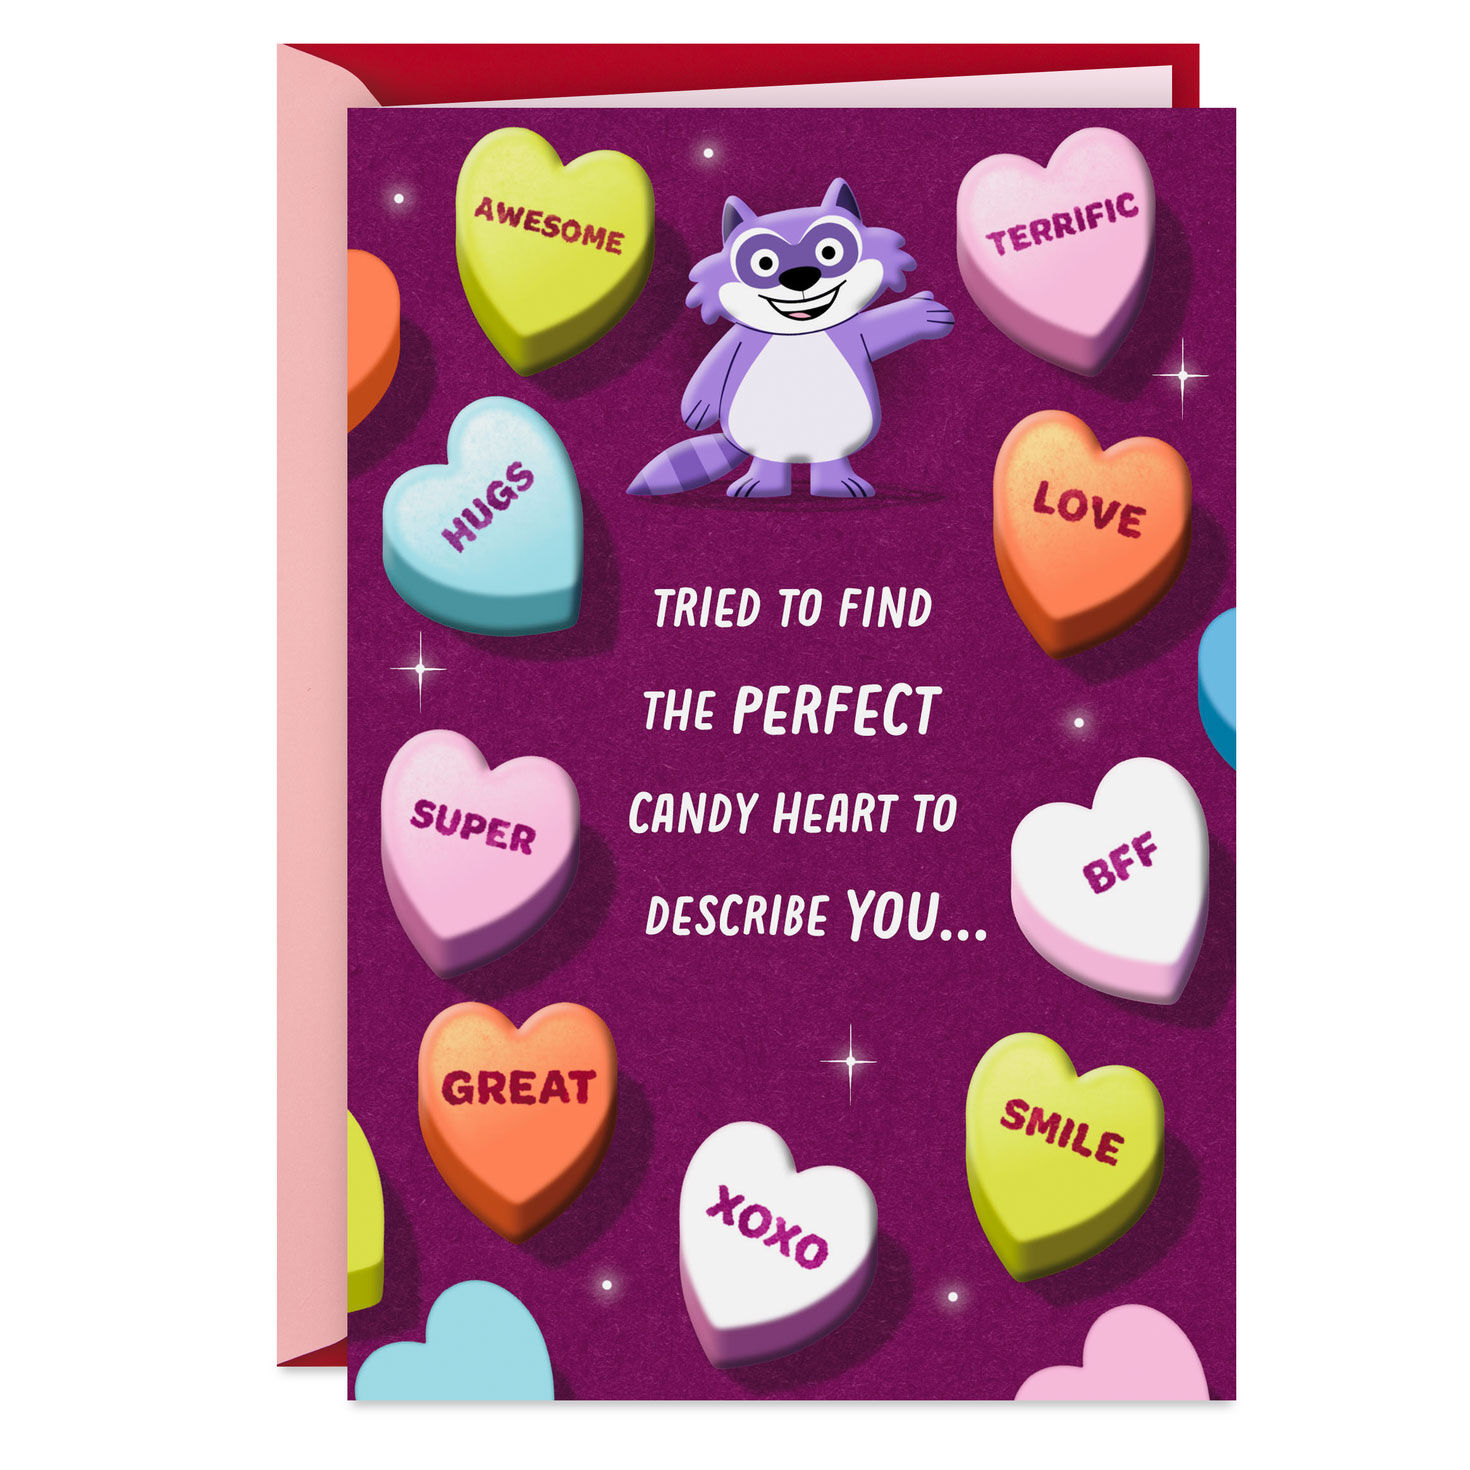 Candy Heart Compliments Valentine's Day Card for only USD 2.99 | Hallmark